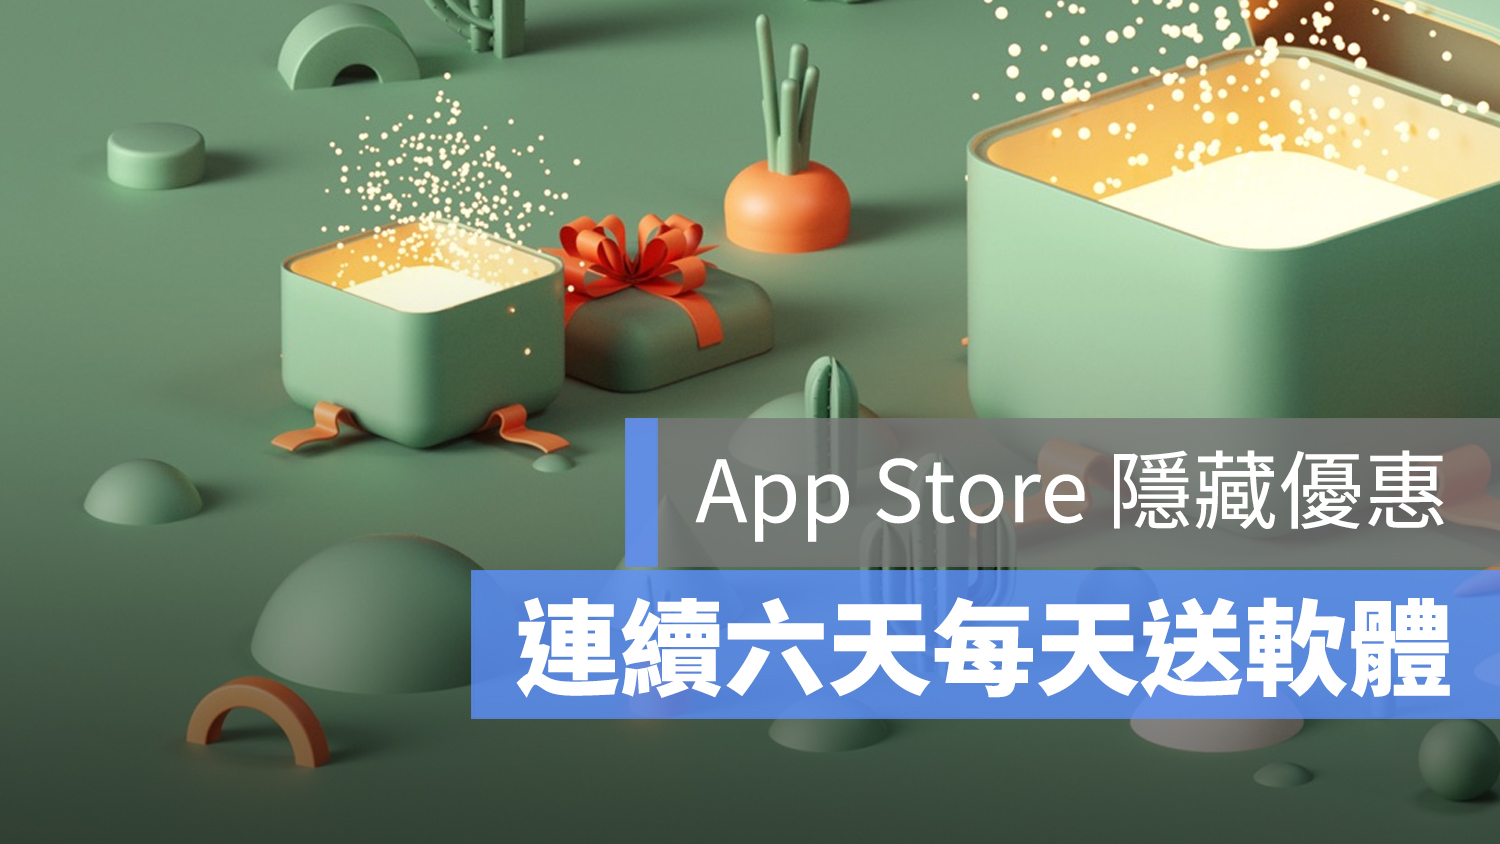 App Store Days of gifts